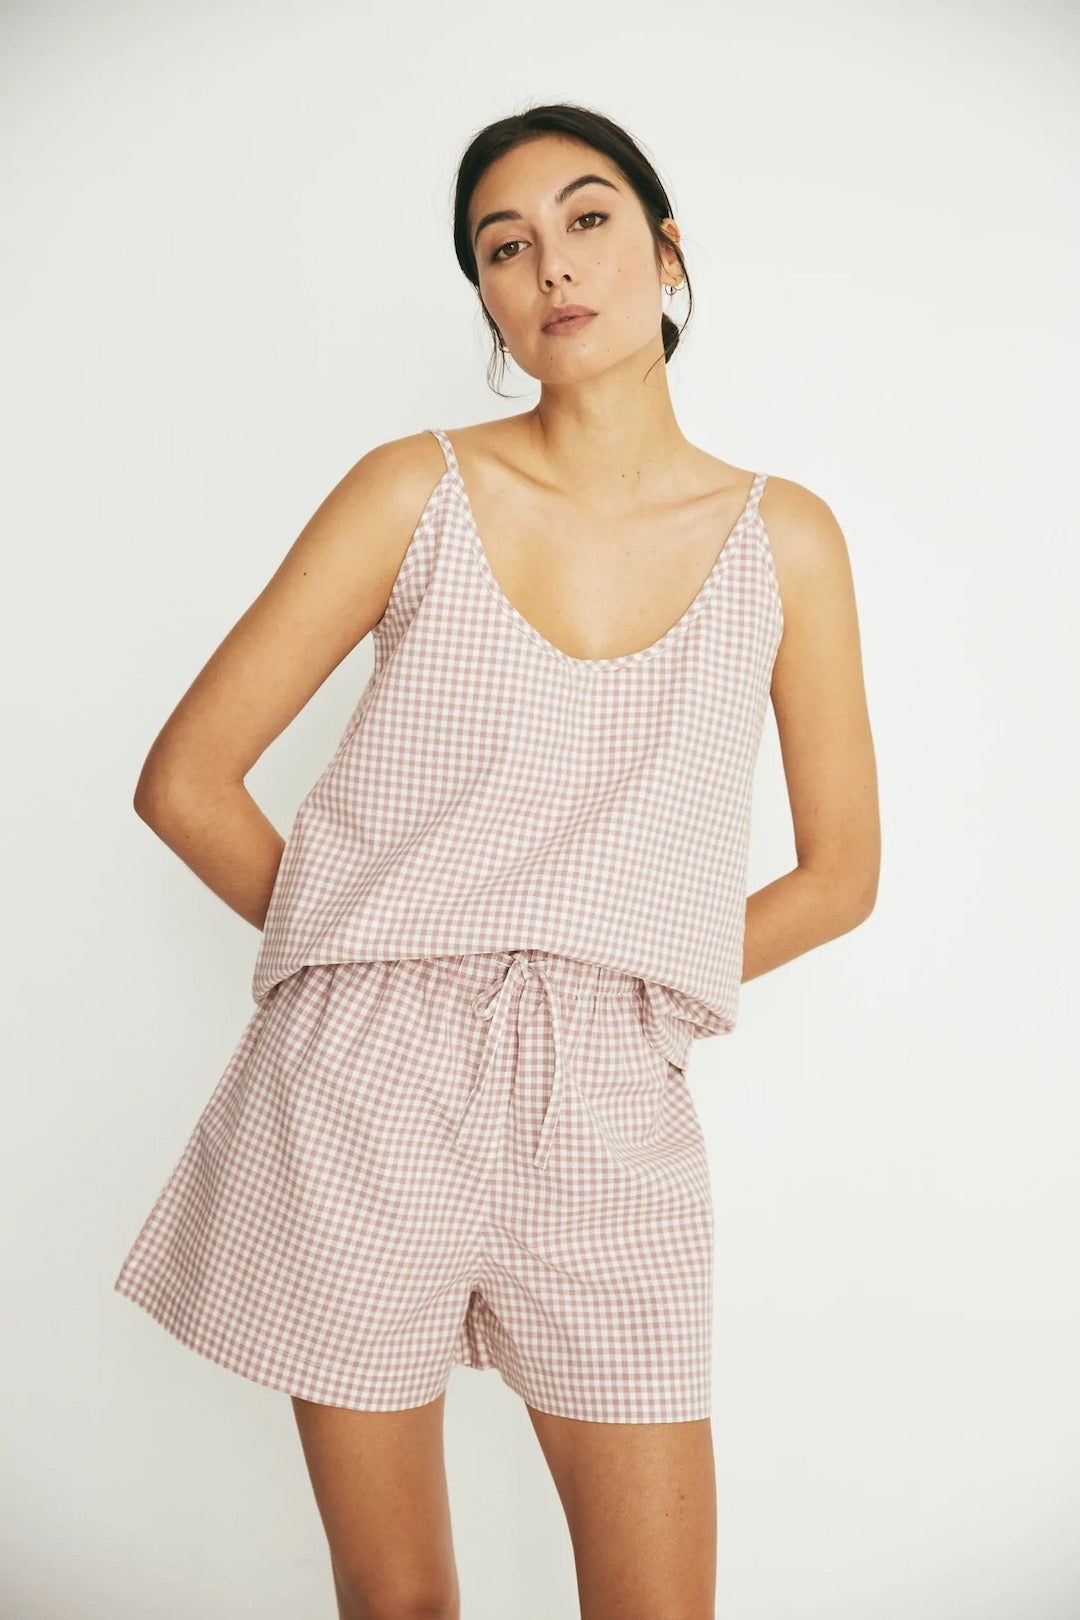 The model is wearing a Summer Set - Rose Gingham romper by general sleep.